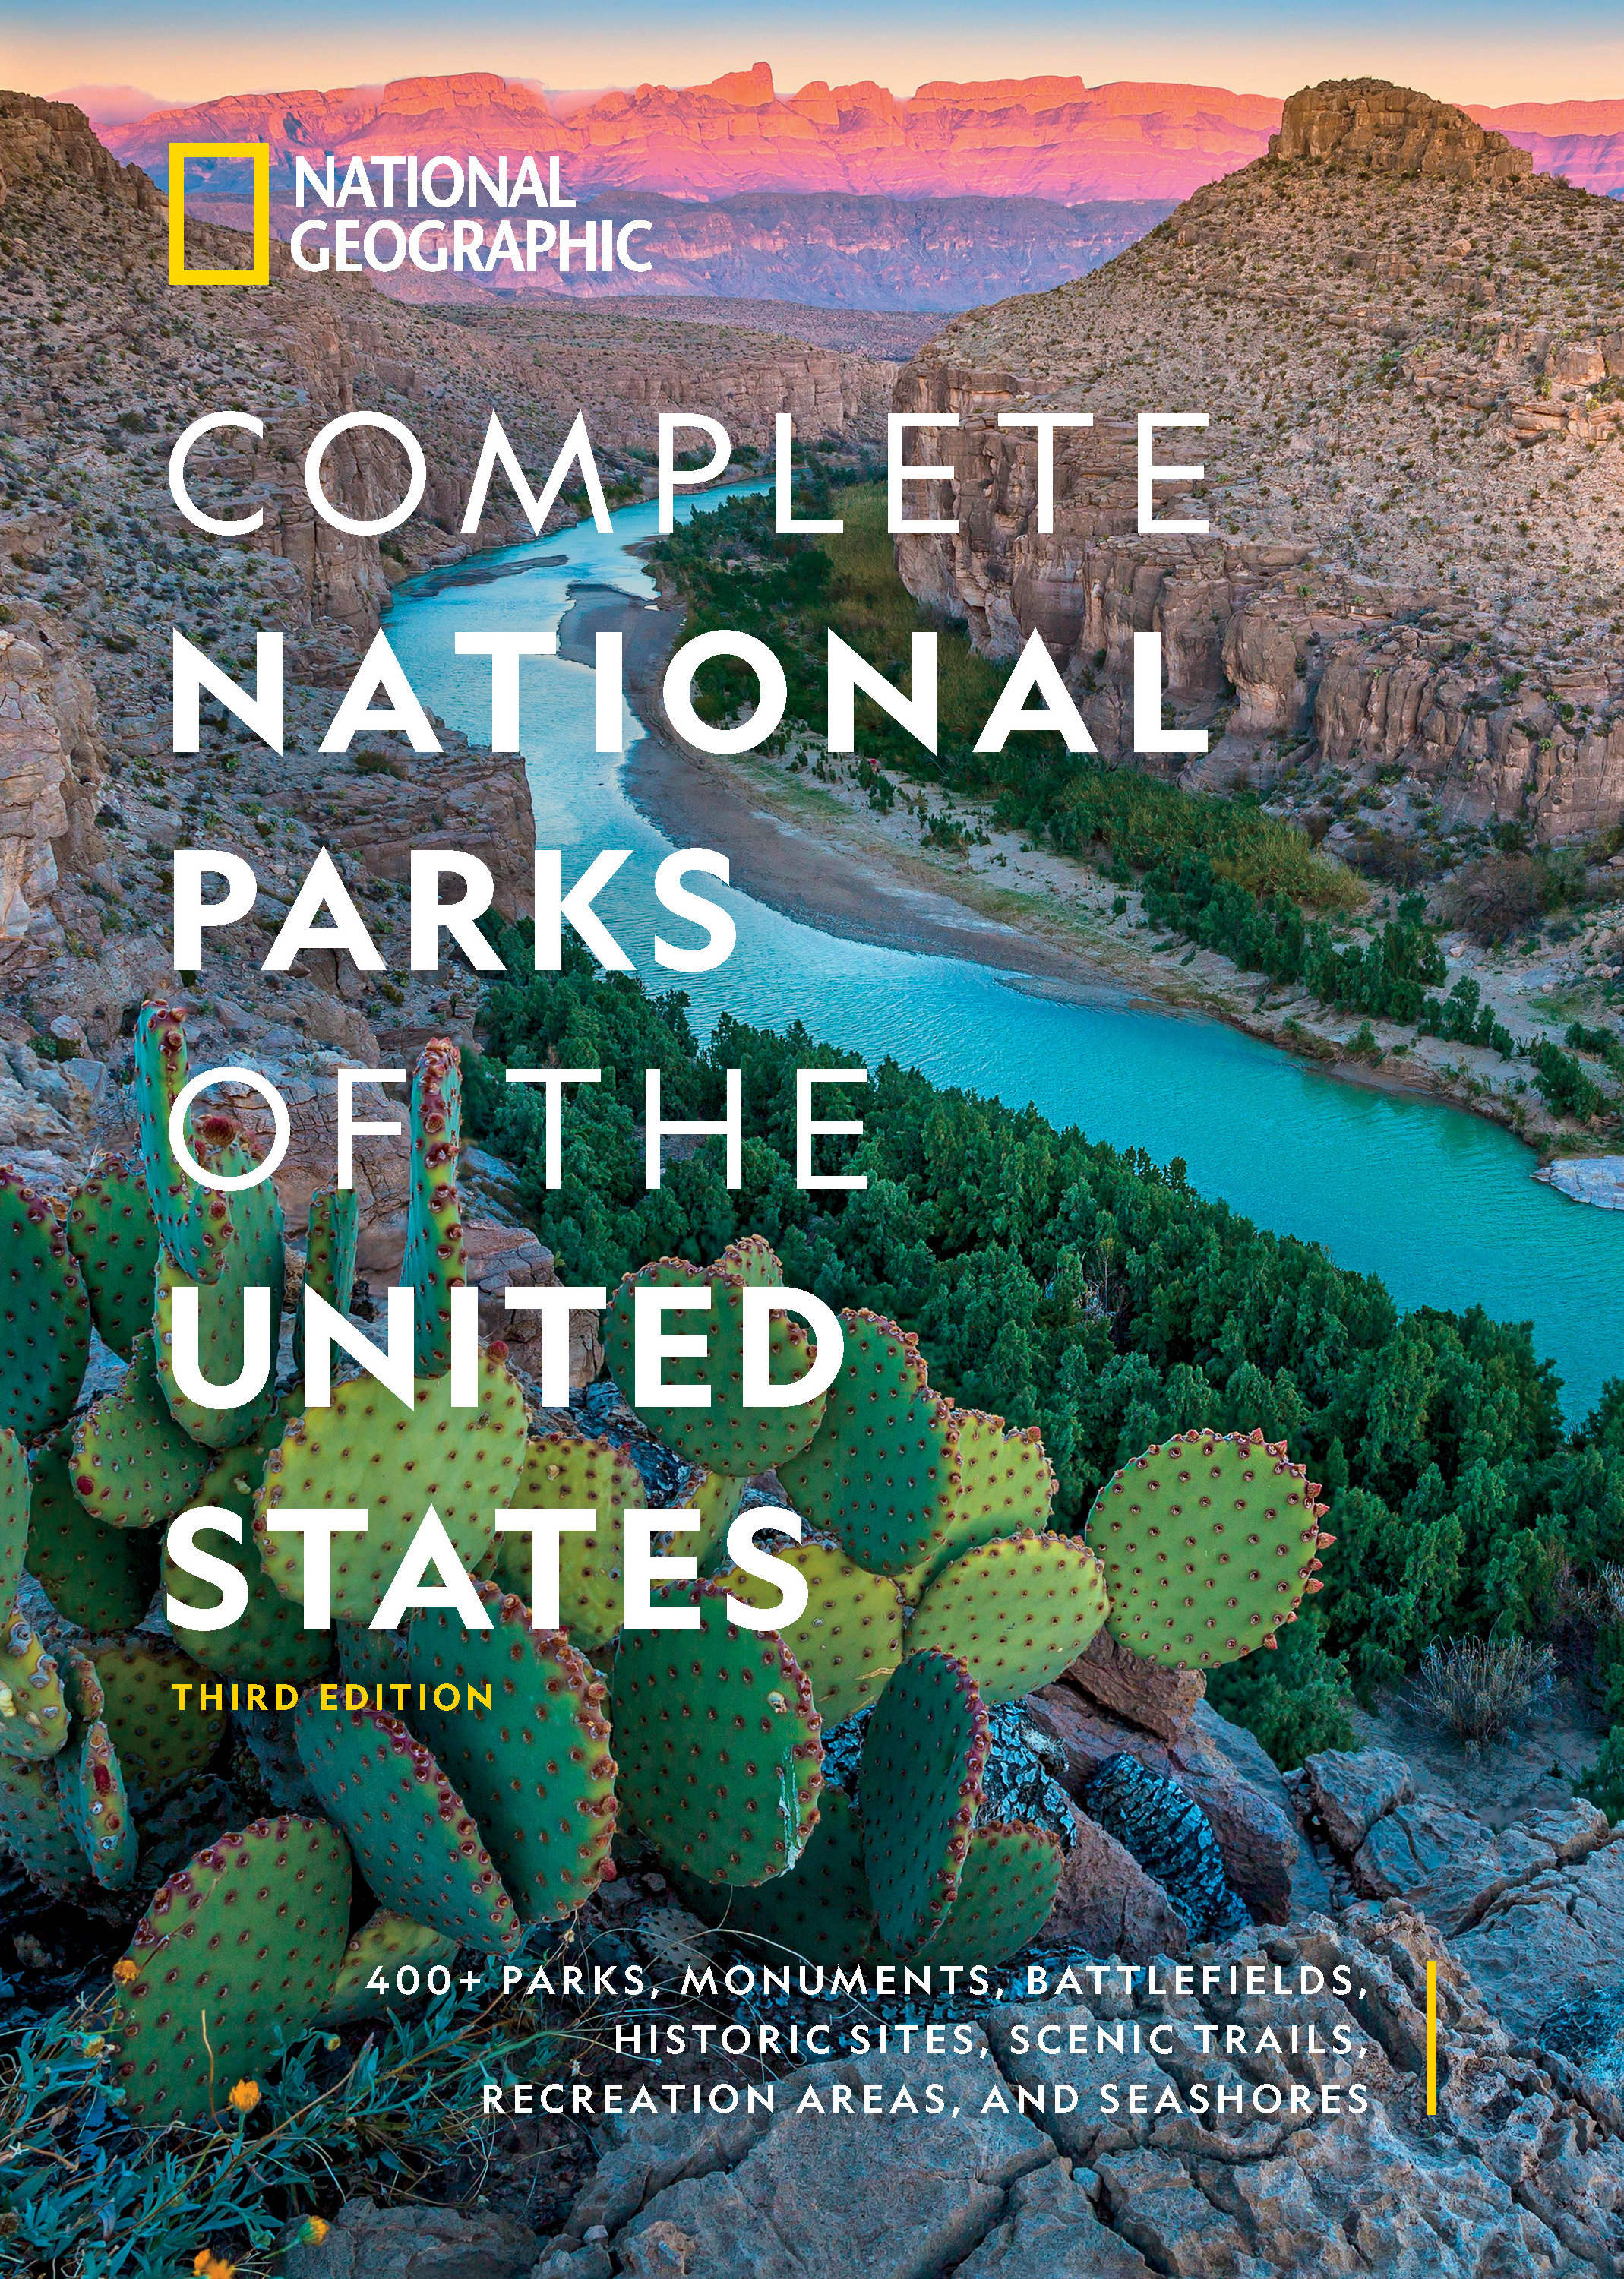 National Geographic Complete National Parks Of The United States, 3Rd Edition (Hardcover Book)